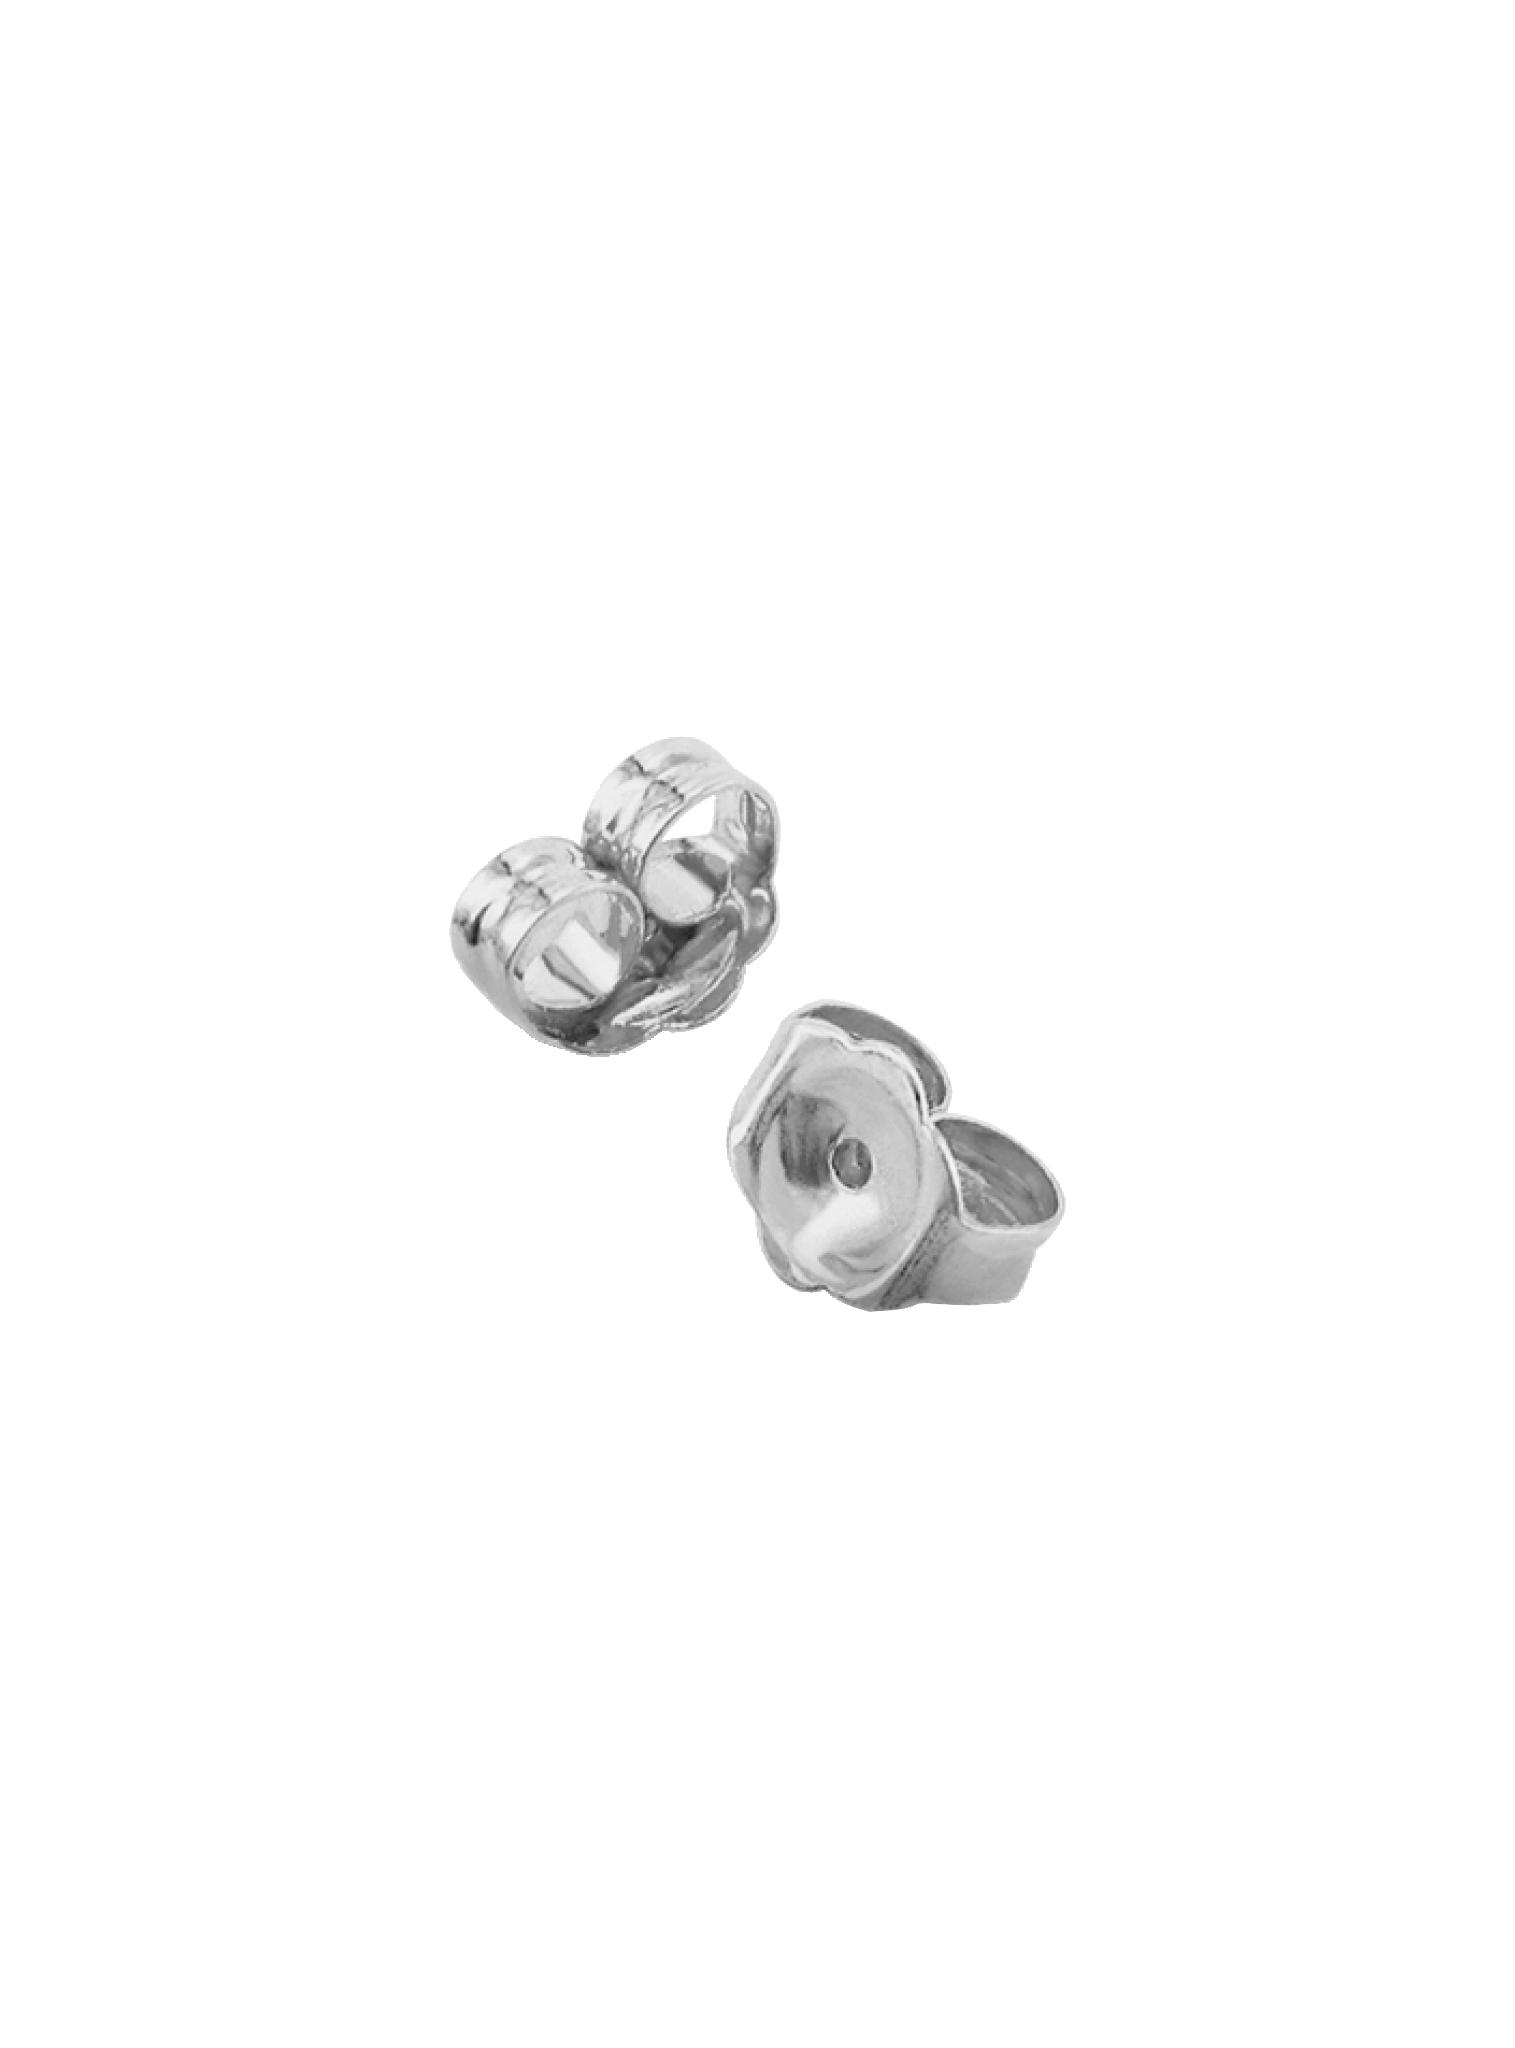 9ct White Gold & Rubber Round Earrings Backs | Jewellerybox.co.uk